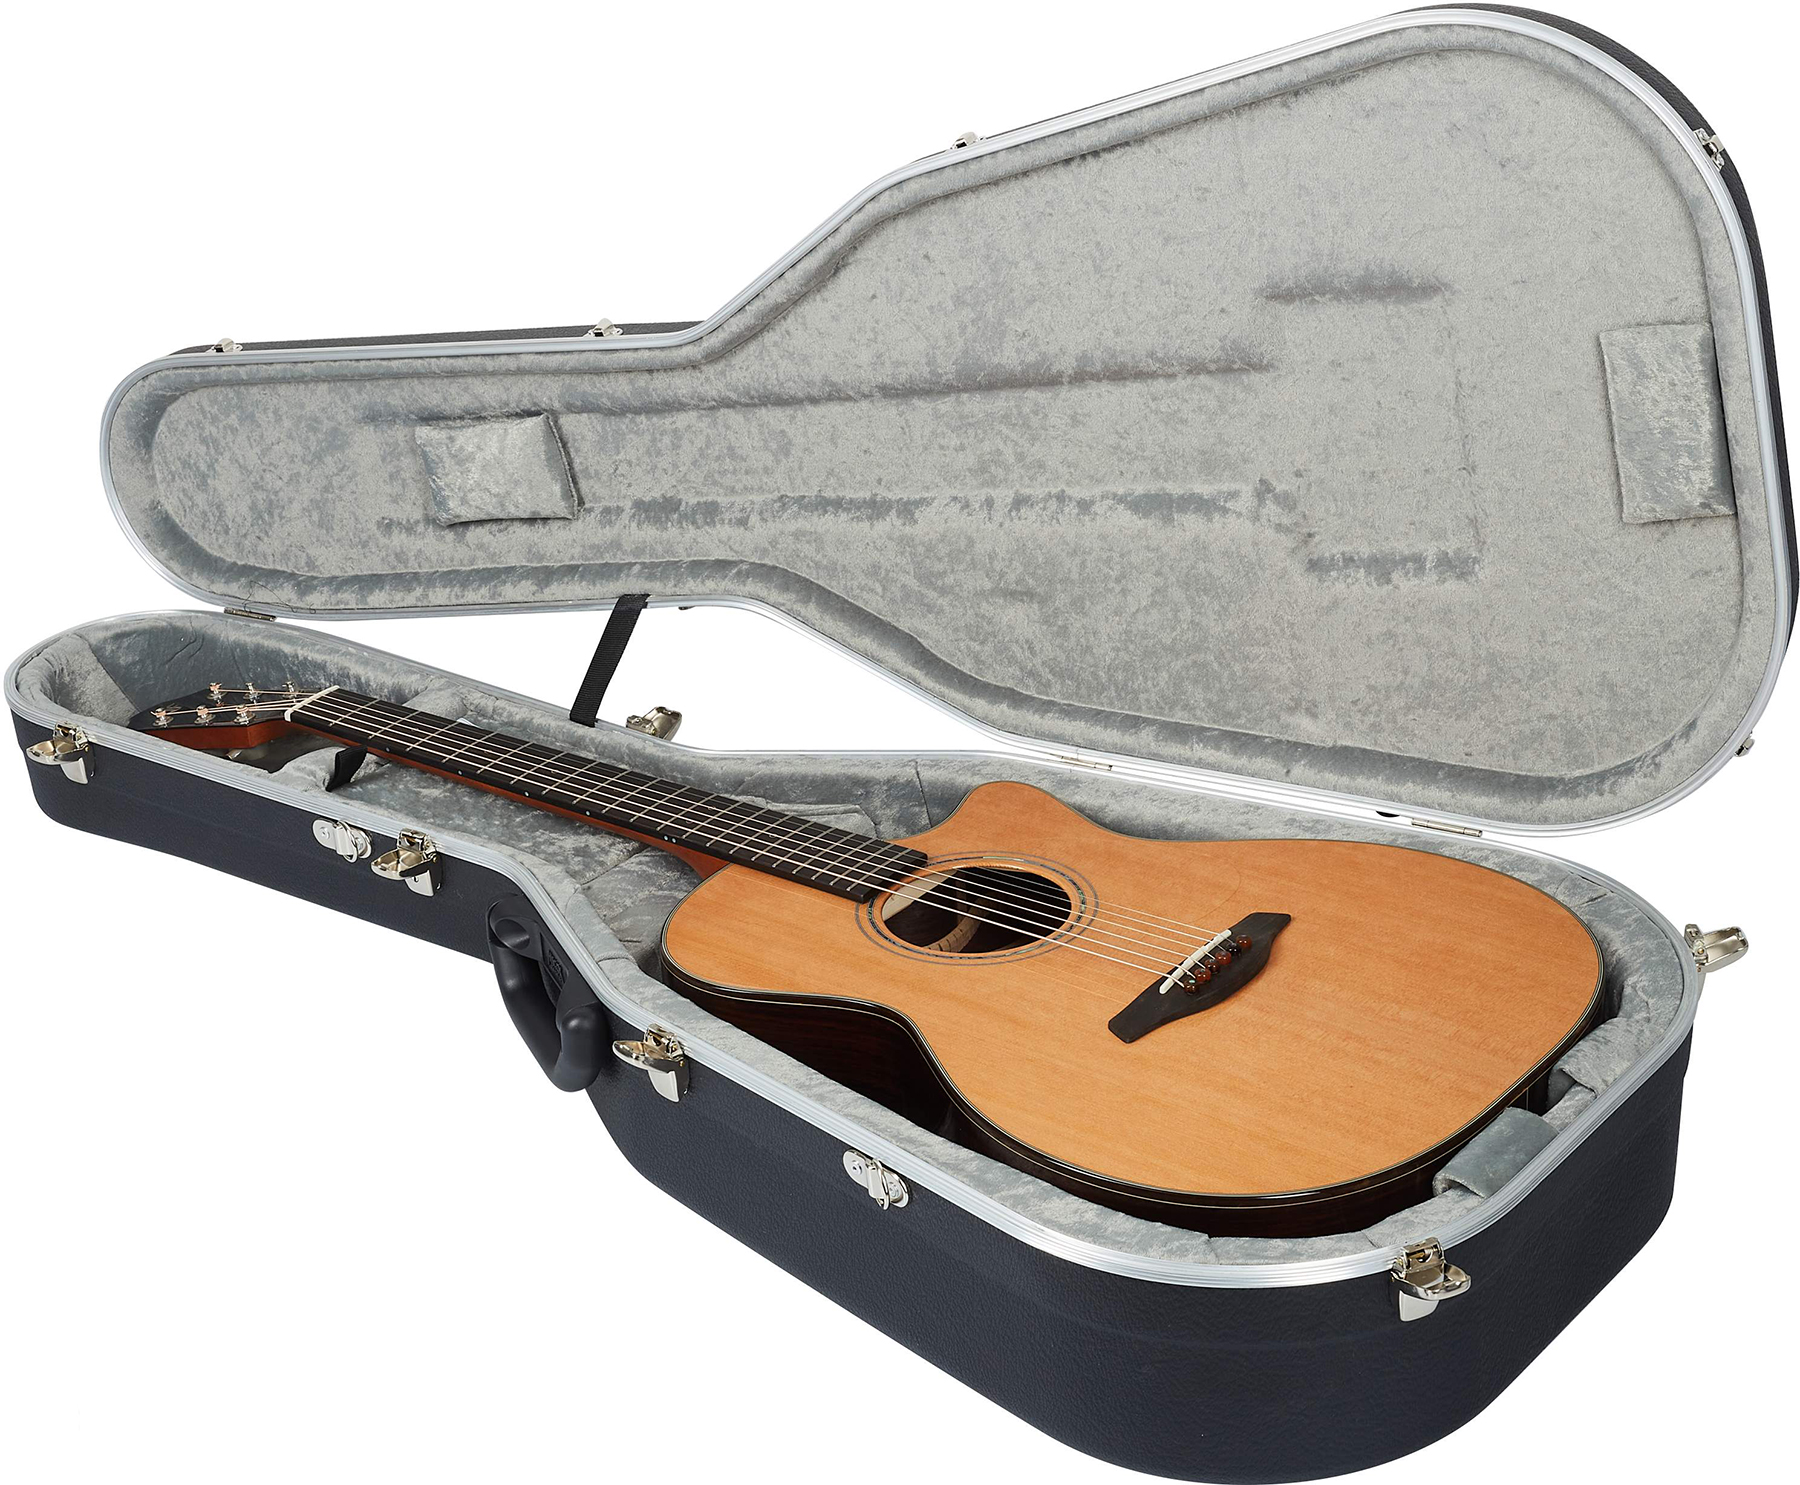 Furch Omc-cr Lrb1 Yellow Orchestra Model Cw Cedre Palissandre Eb - Natural Full-pore - Electro acoustic guitar - Variation 8